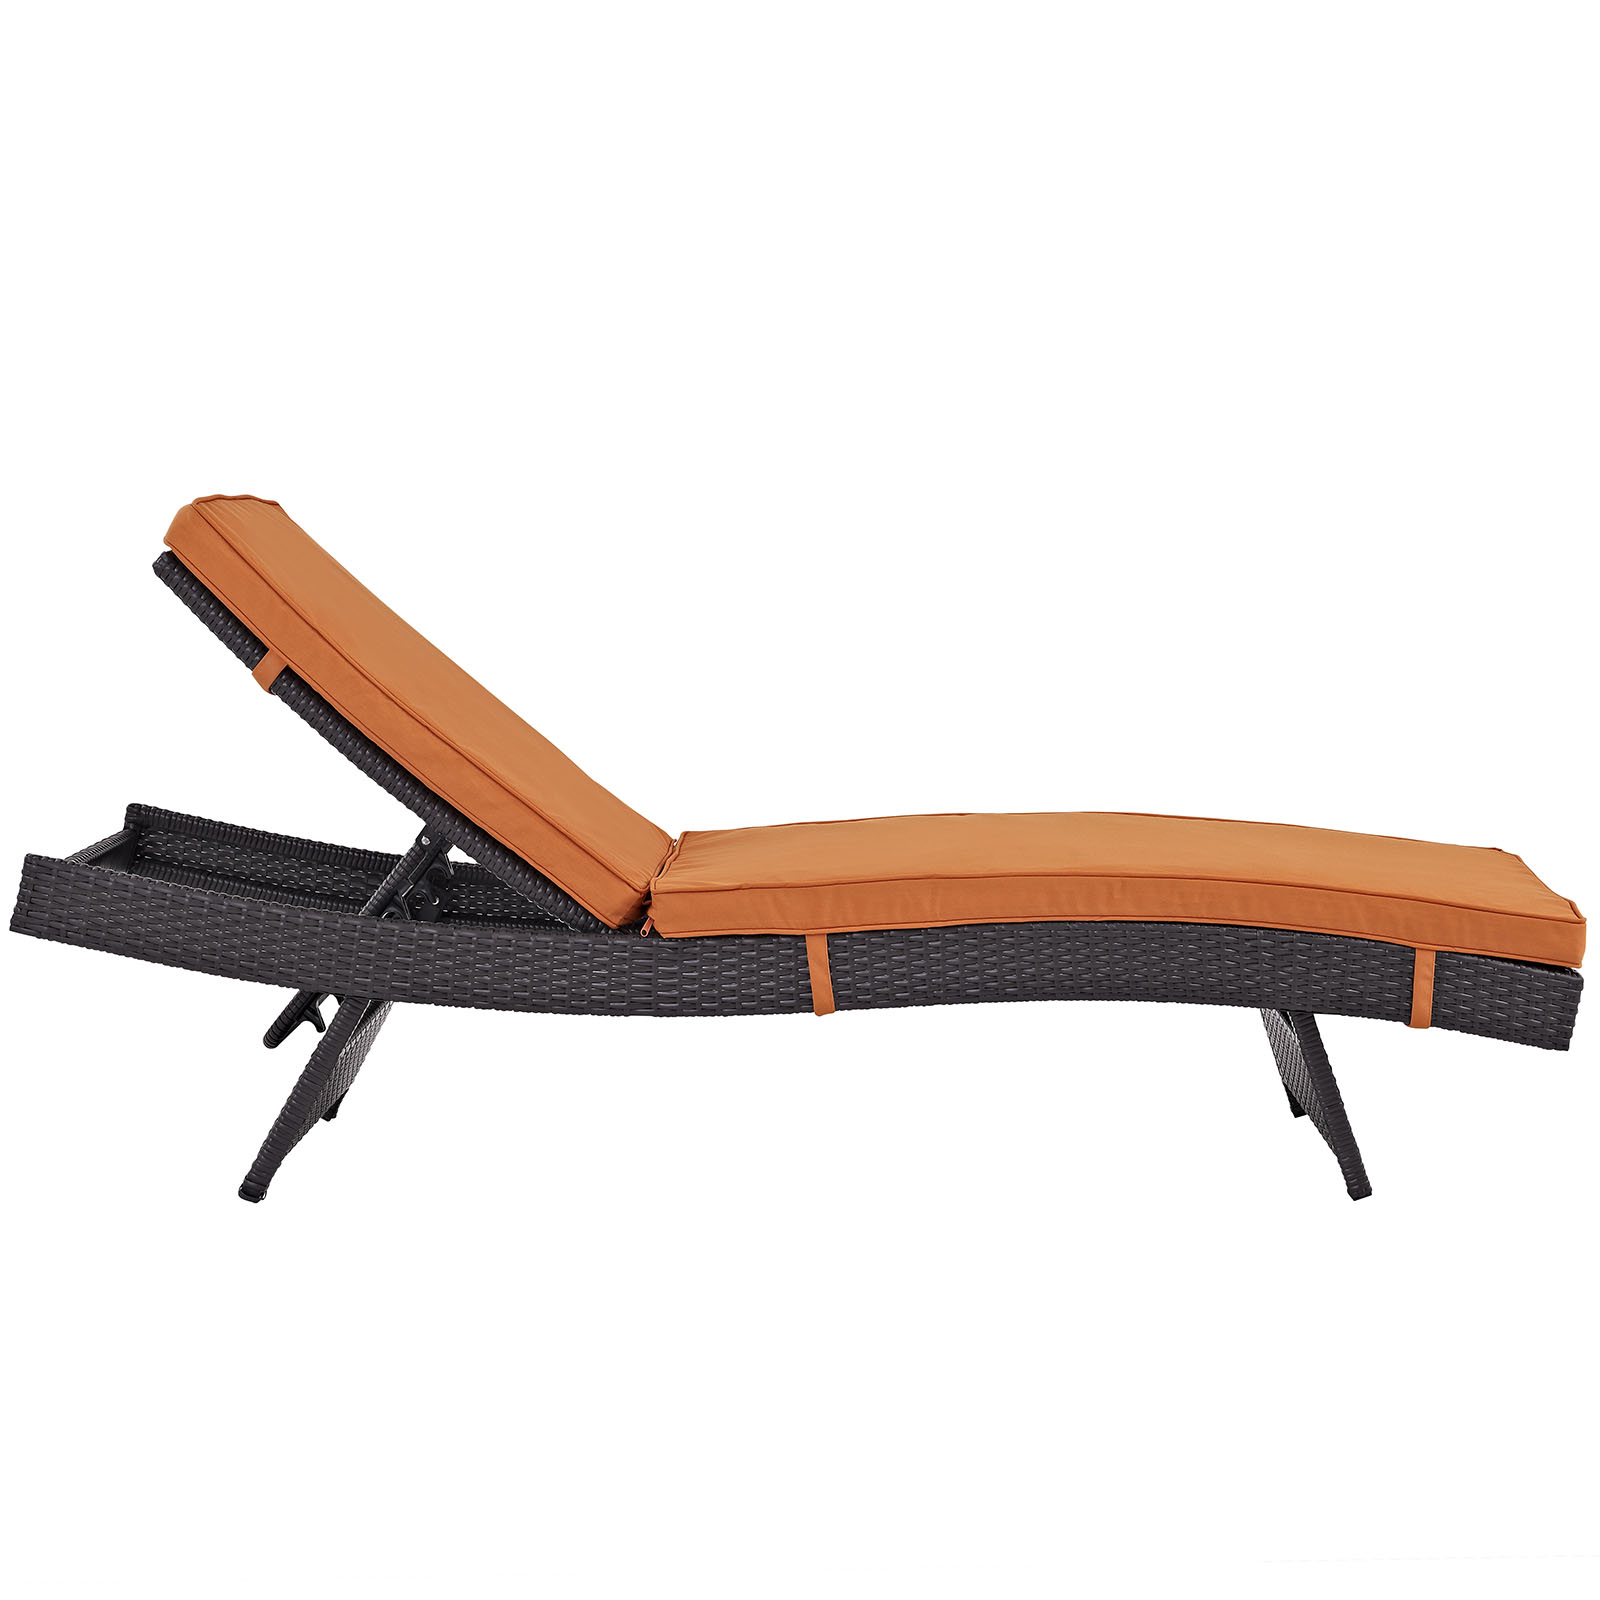 Modern Contemporary Urban Design Outdoor Patio Balcony Chaise Lounge Chair ( Set of 2), Orange, Rattan - image 3 of 4